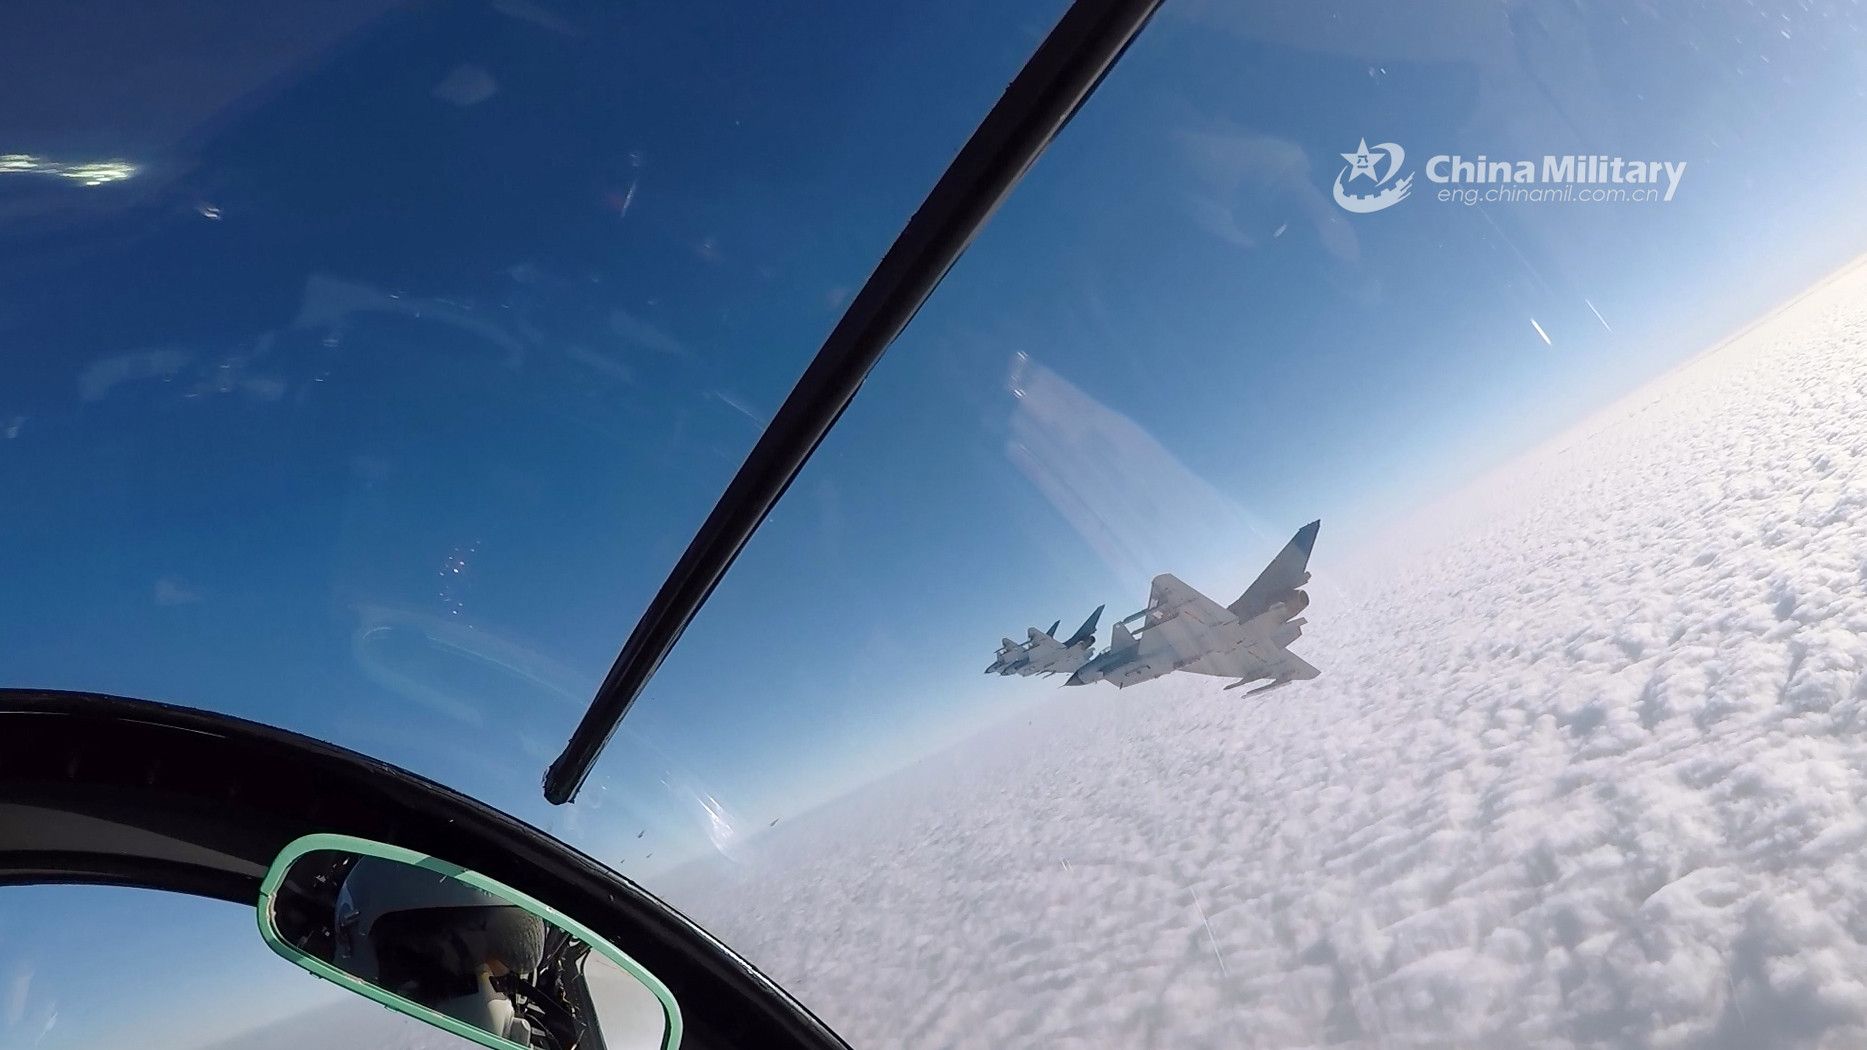 Fighter jets soar to stratosphere above clouds